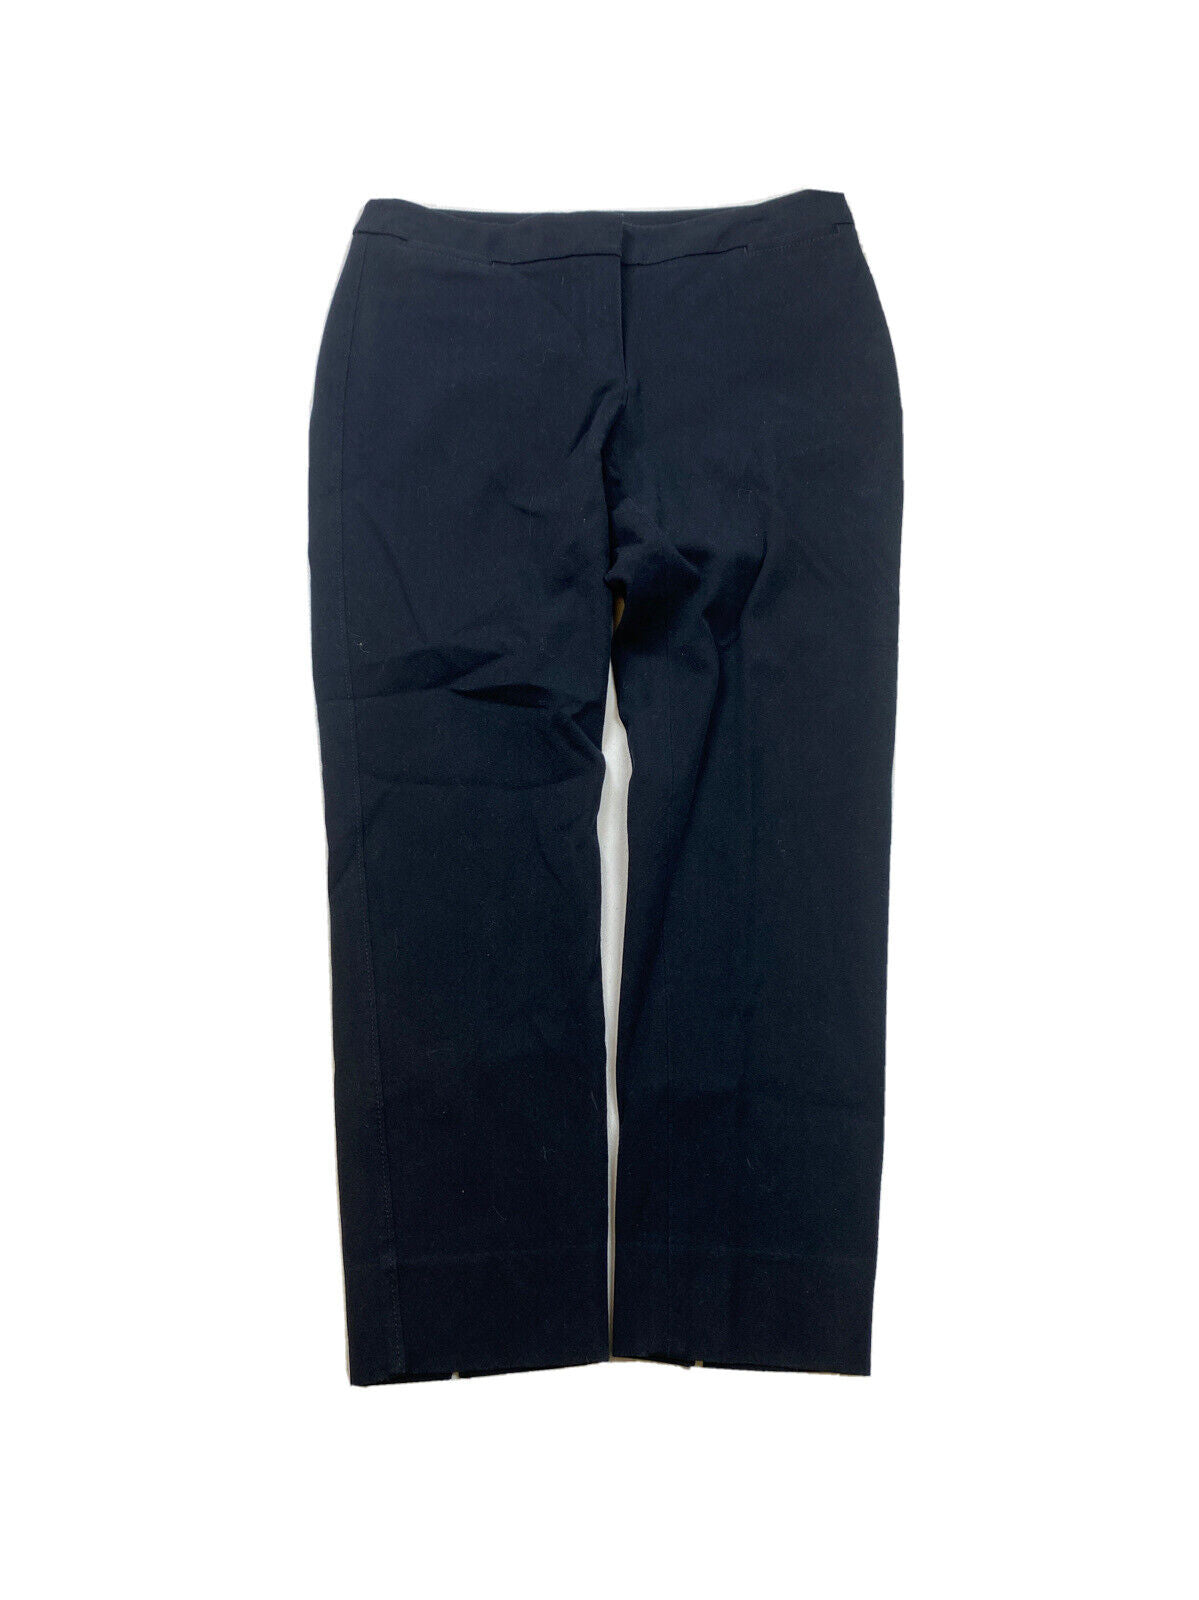 White House Black Market Women's Black Cropped Skimmer Pants - 4 R – The  Resell Club